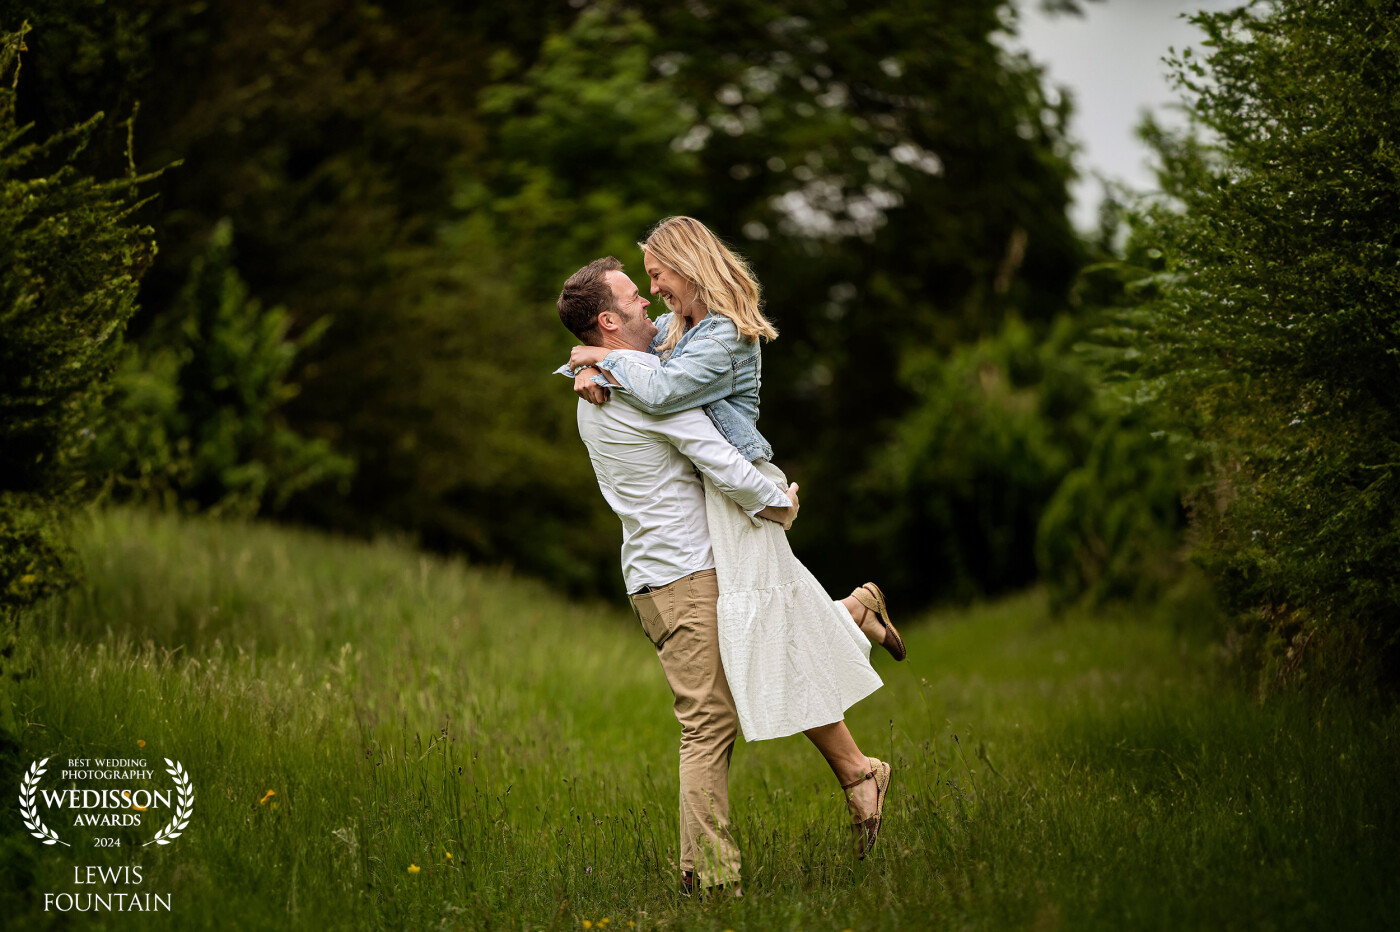 You can’t beat teaching a couple a lift during their pre wedding shoot.<br />
Lucy & Chris were naturals in front of the camera, making their wedding images so natural.